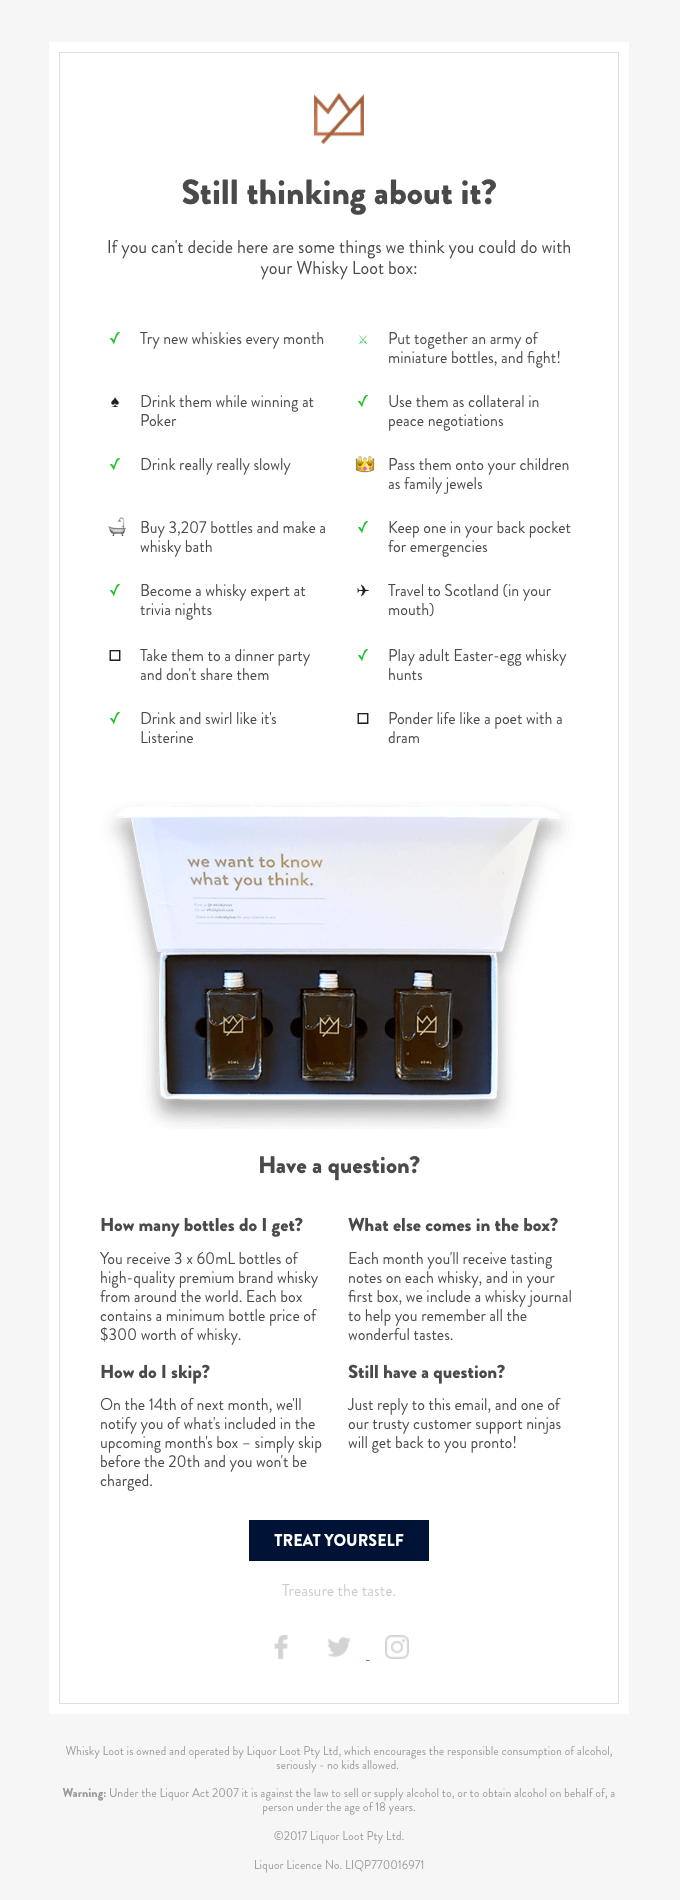 Whisky Loot Box with their "Still thinking about it" email